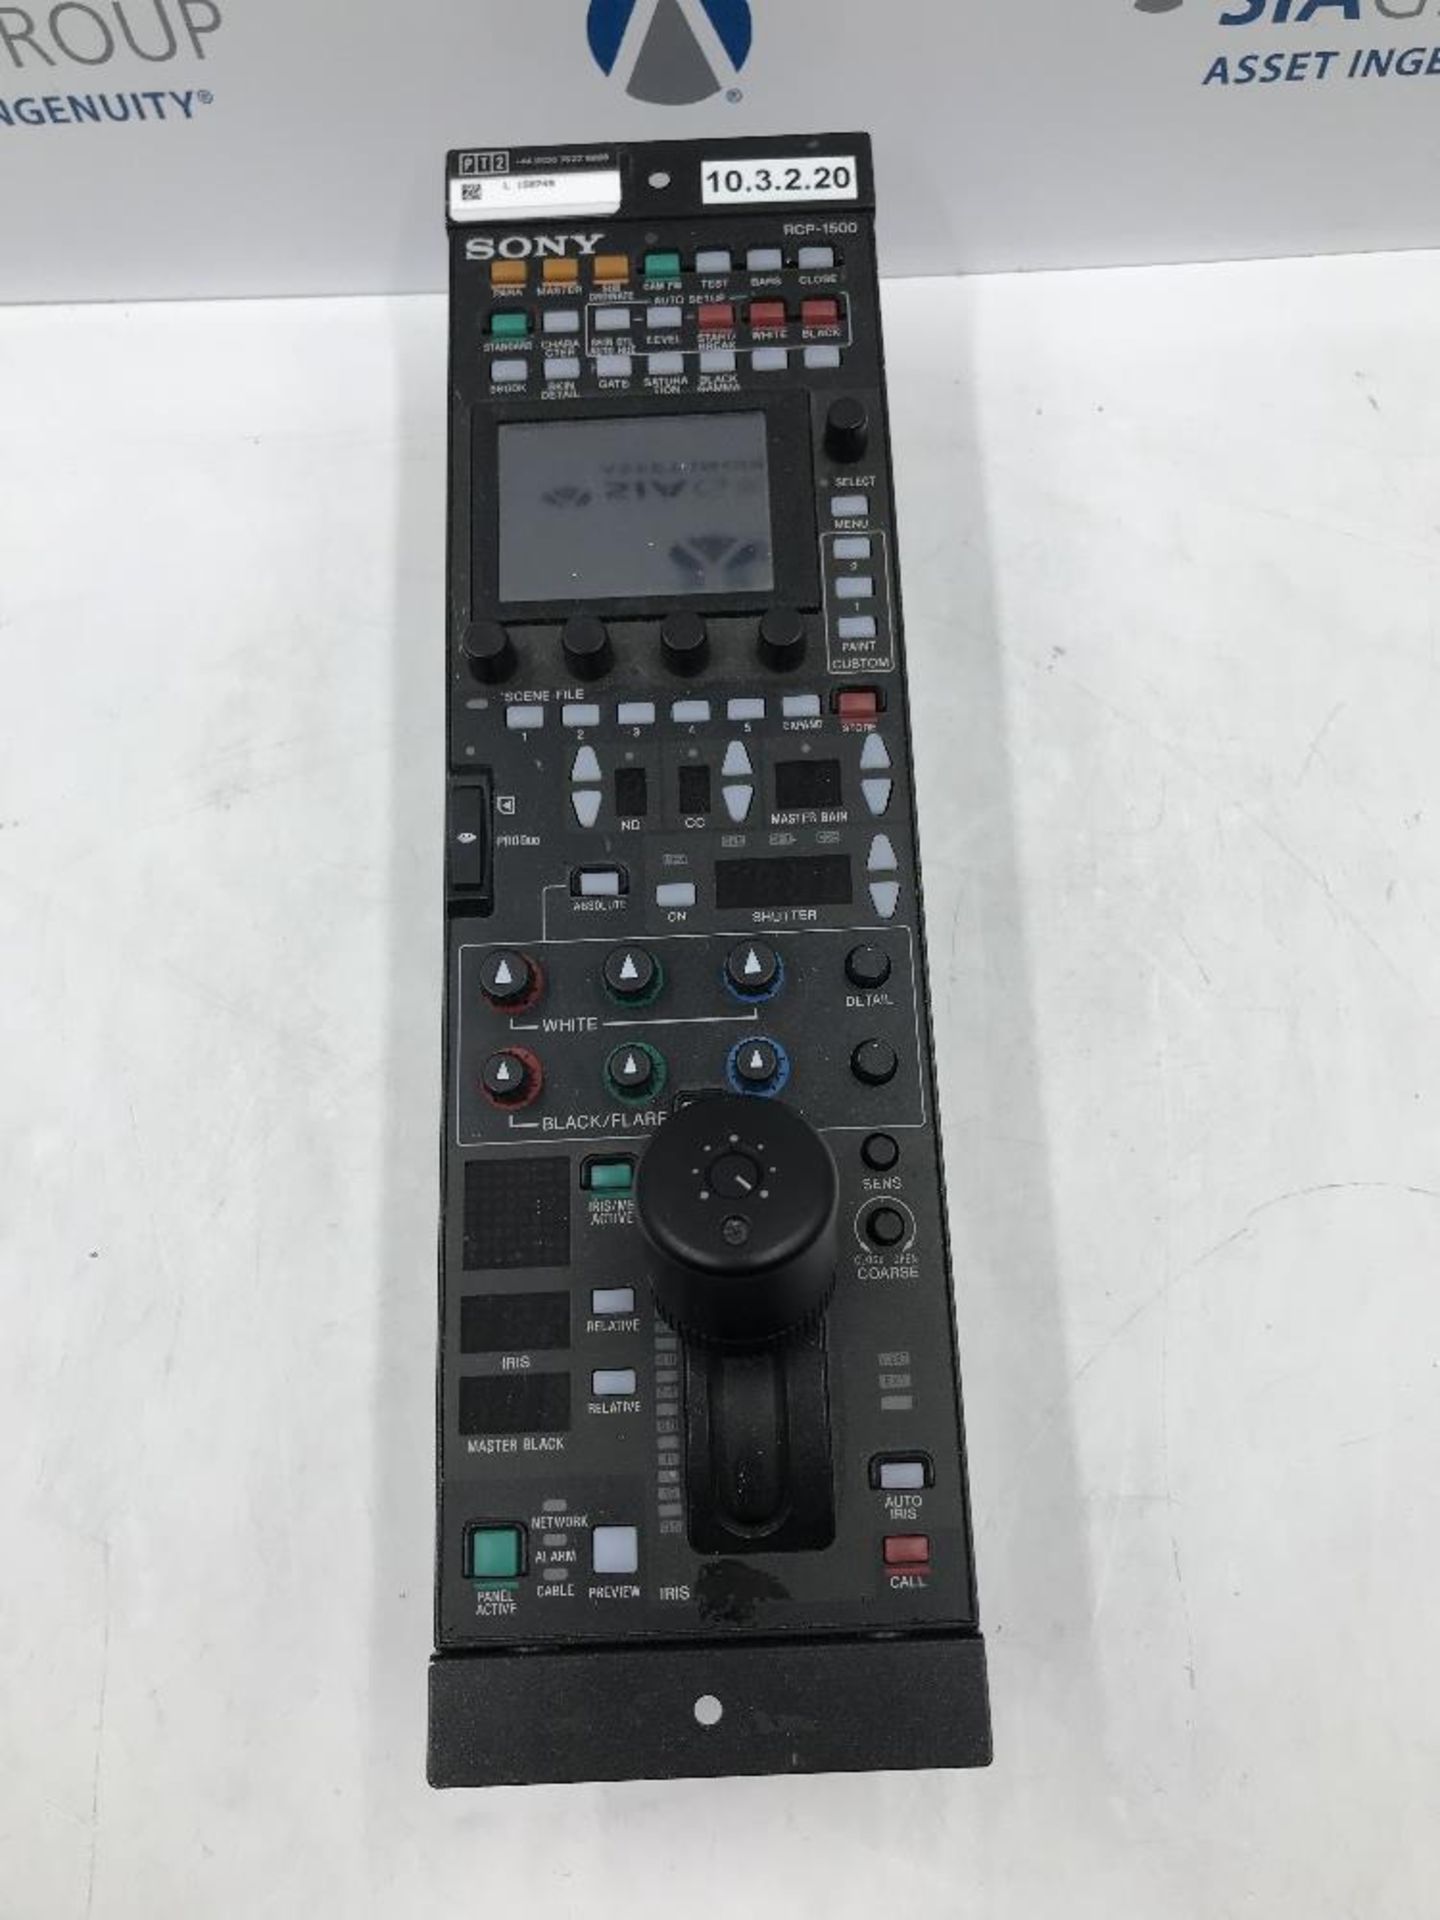 Sony RCP-1500 Remote Control Panel (Joystick Type) for use with HDC & XDCAM System Cameras - Image 2 of 3